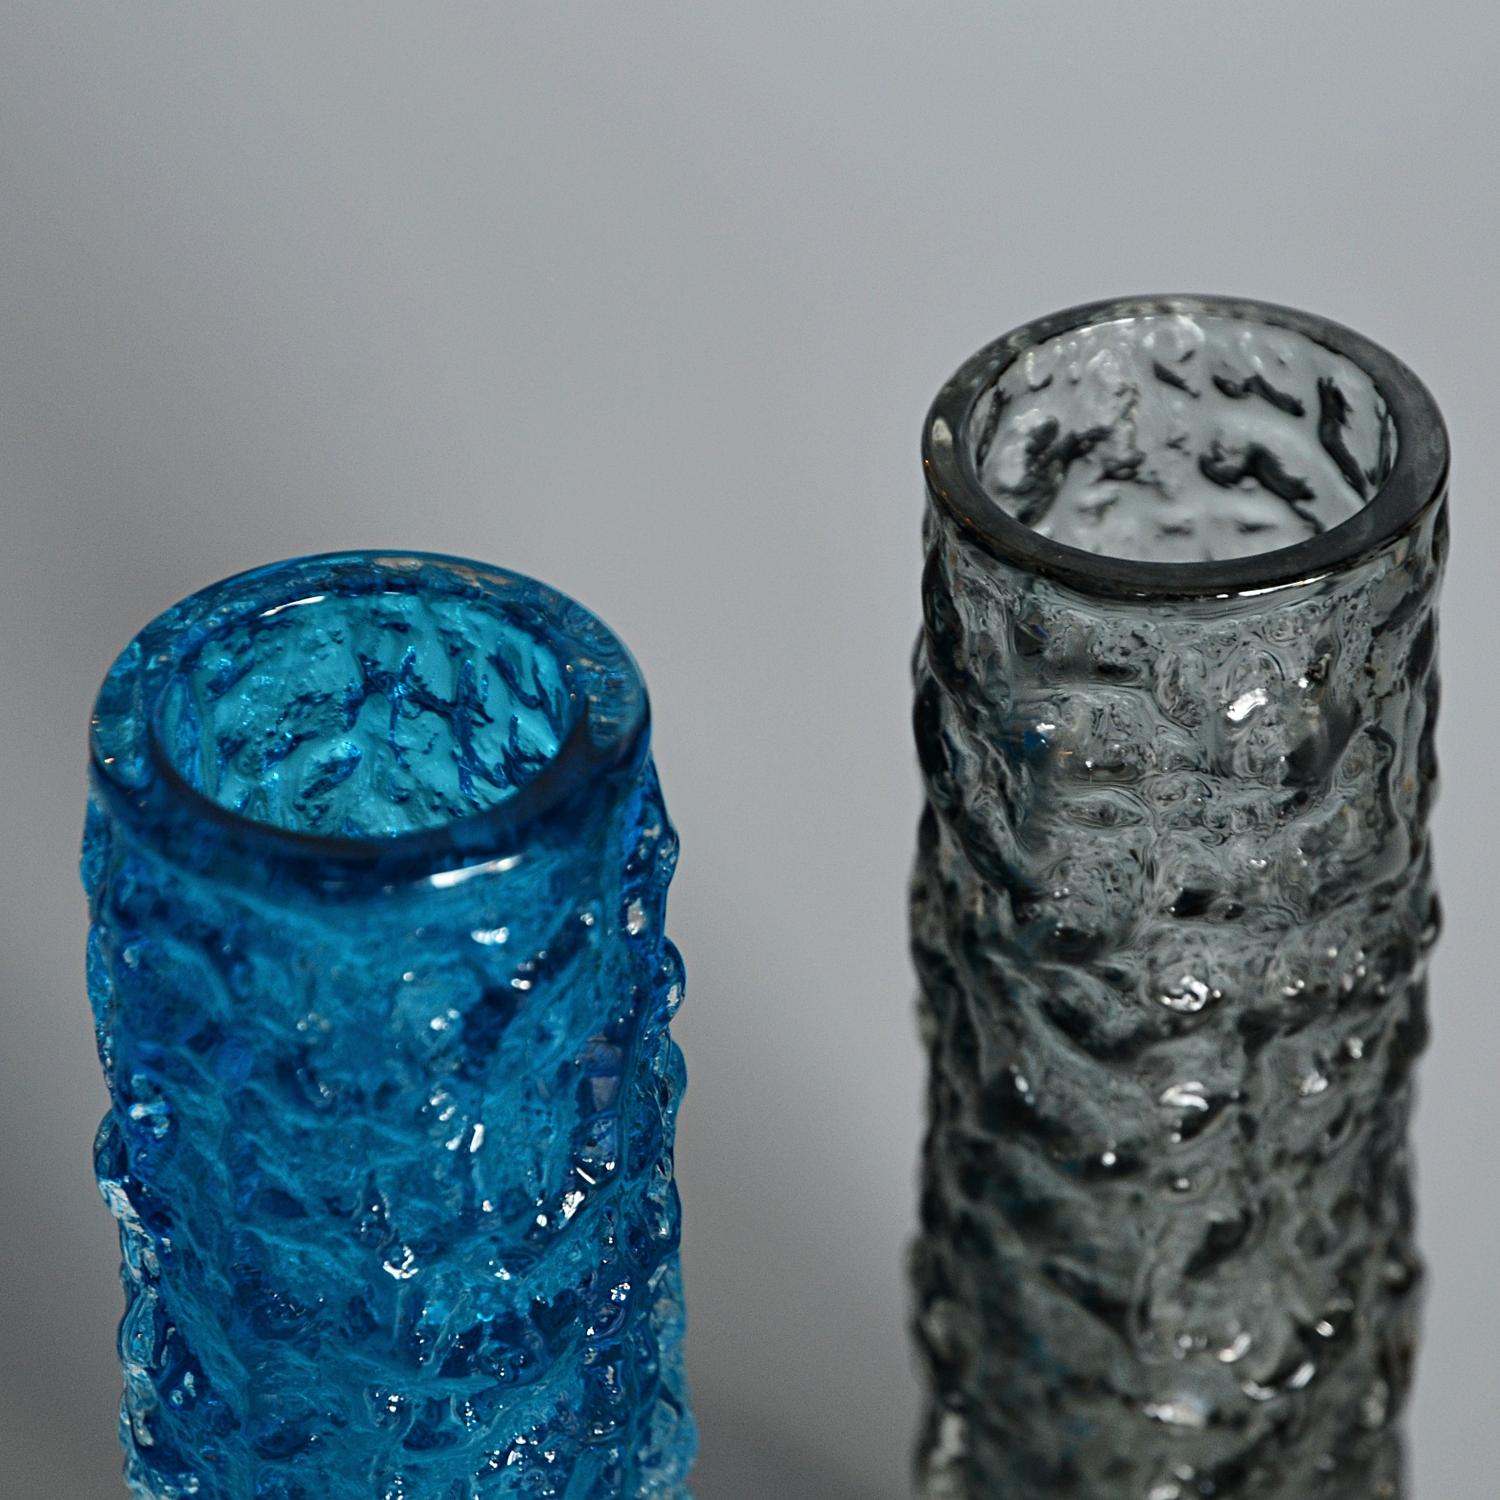 English Collection of Six Textured Glass Vases by Geoffrey Baxter for Whitefriars